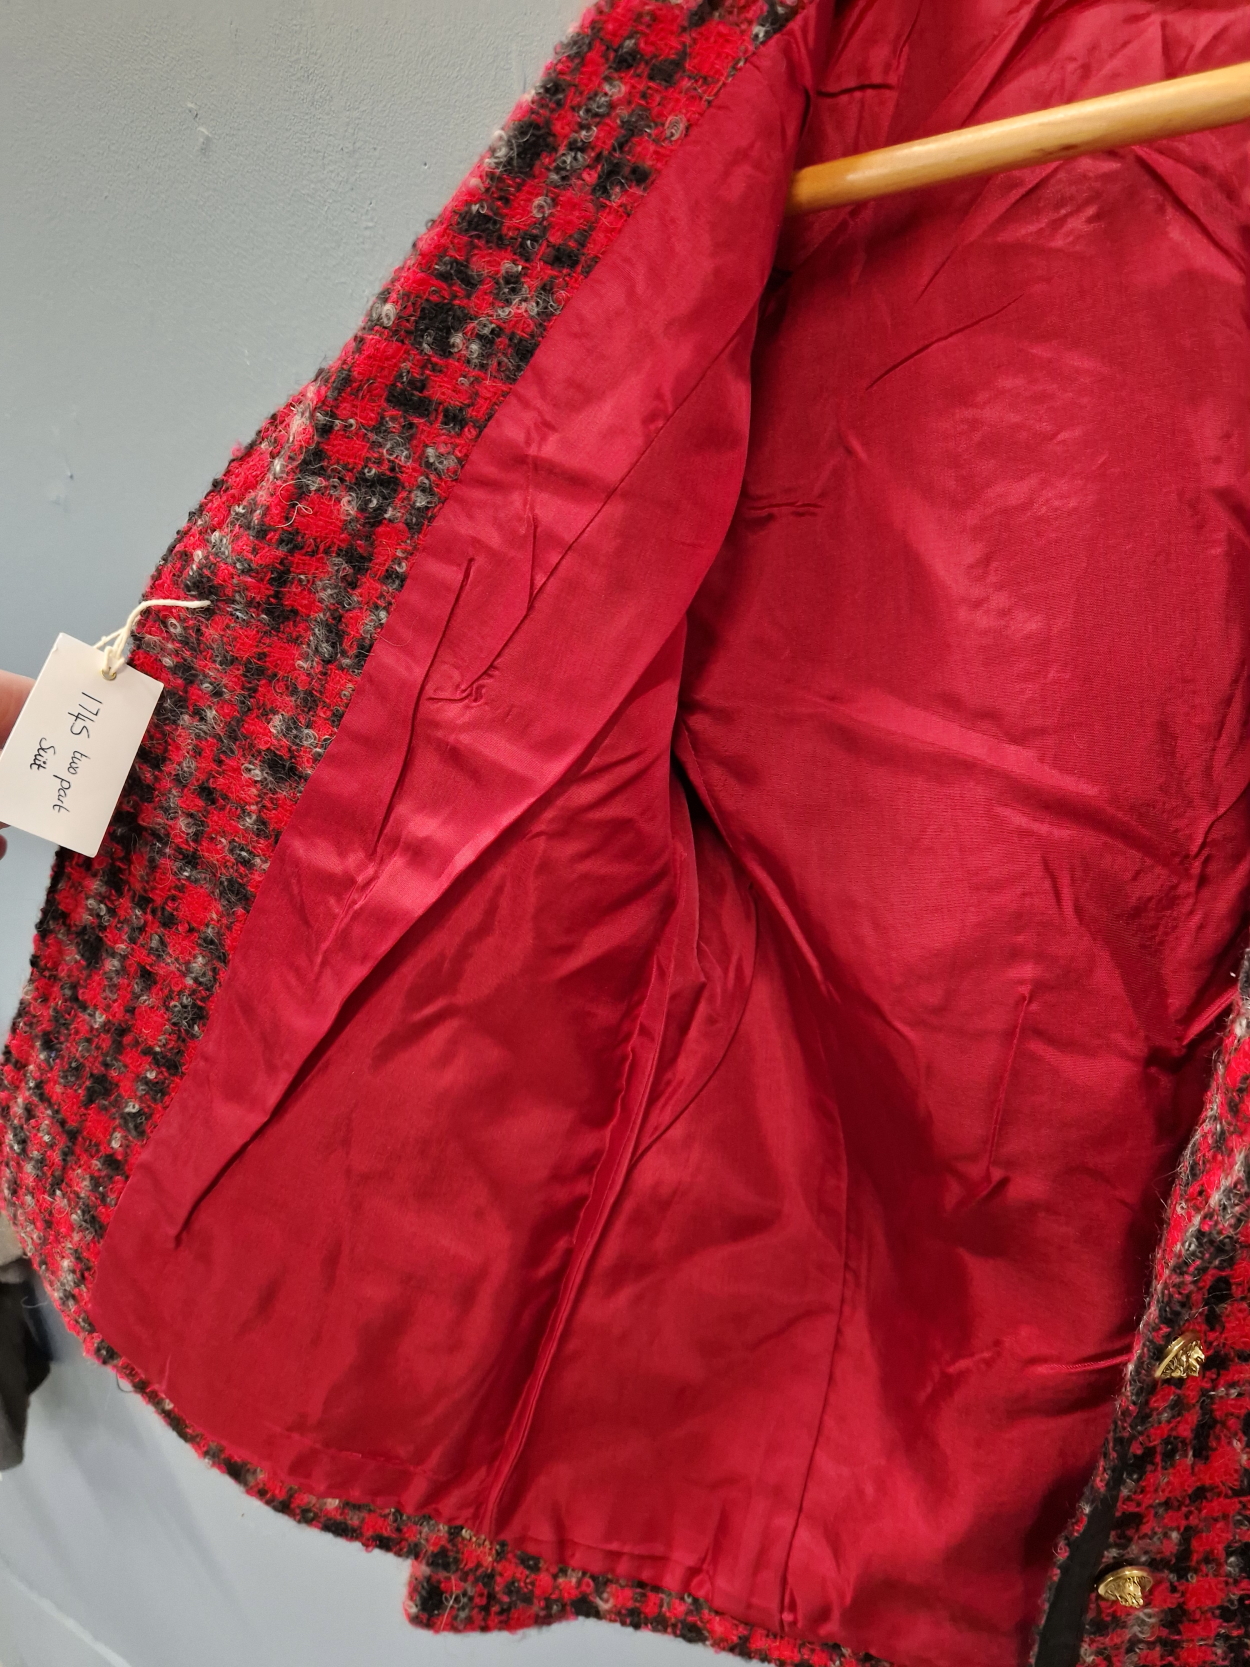 LADIES SUIT. MARTHE HELLY. BORDEAUX. A TWO PART JACKET AND SKIRT SUITE, BLACK AND RED CHECK. - Image 3 of 7